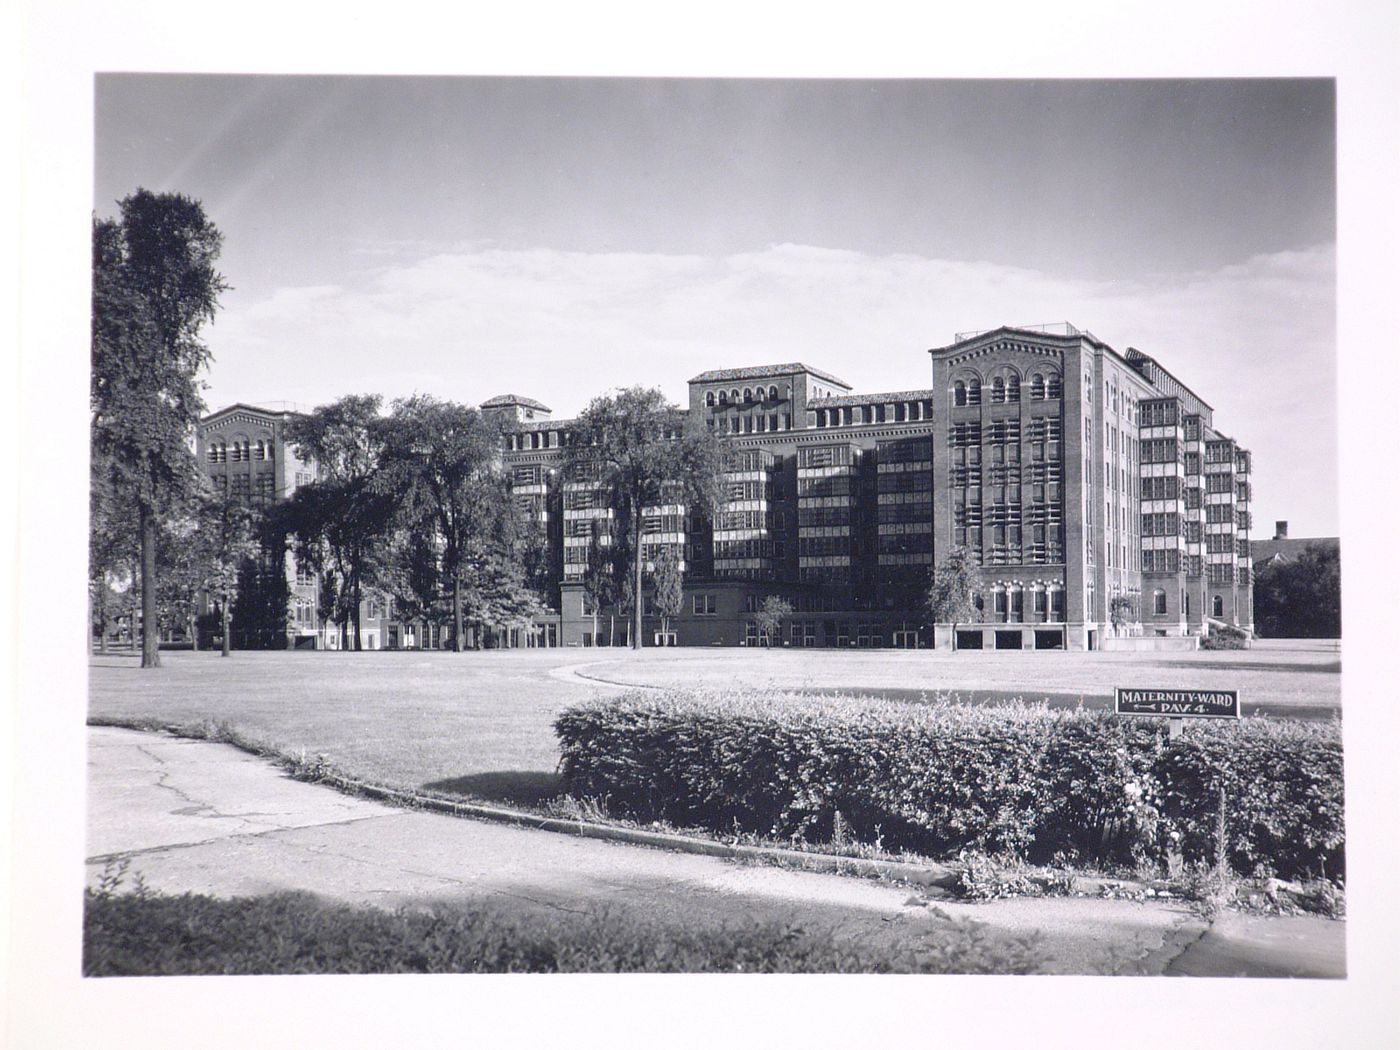 View of the lateral [?] façade of the Tuberculosis Building, Herman Kiefer Hospital, Detroit, Michigan